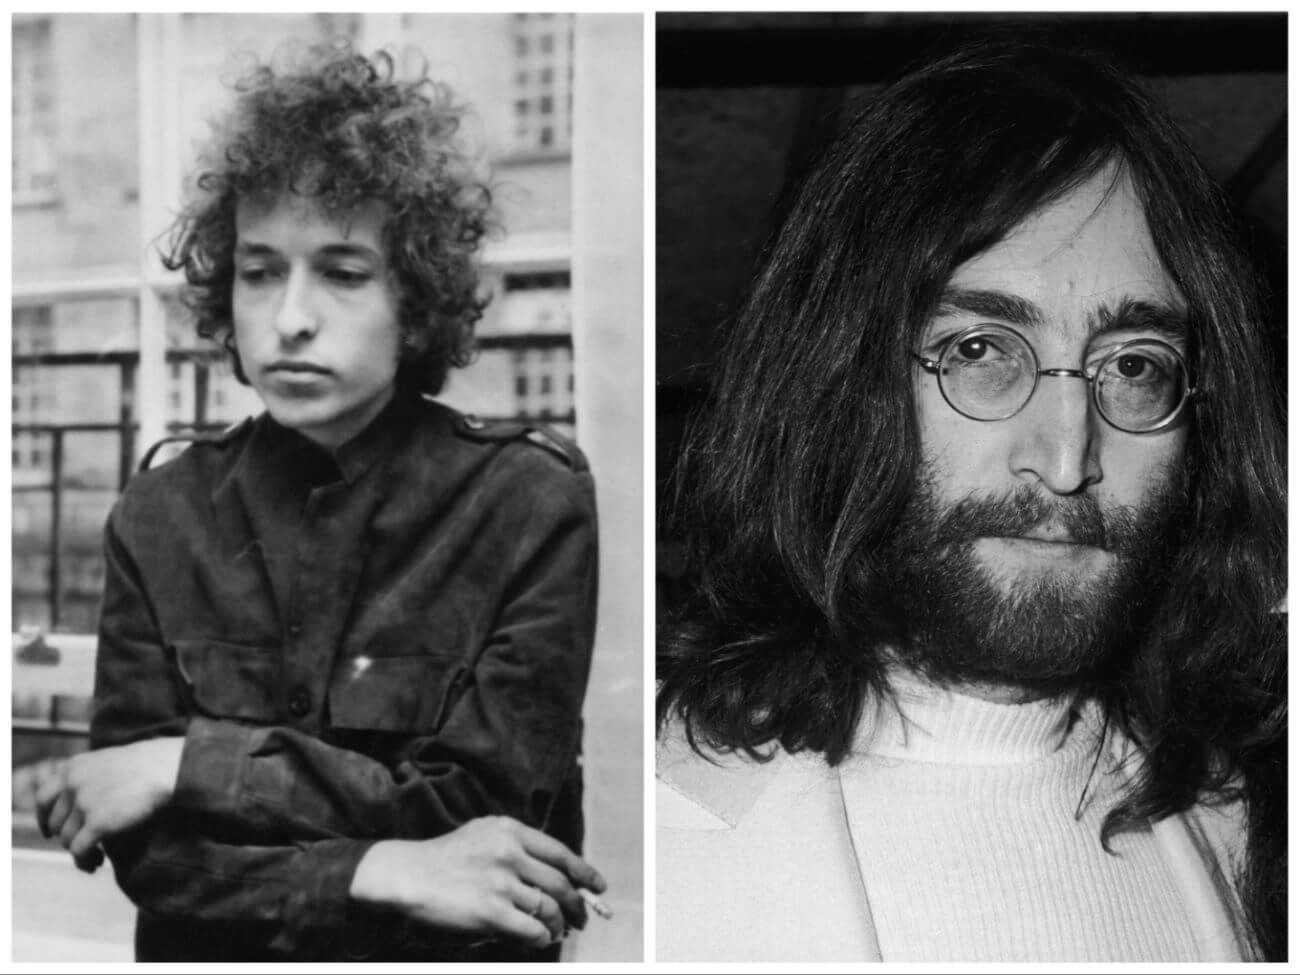 A black and white picture of Bob Dylan holding a cigarette by a window. John Lennon wears a white turtleneck and glasses.